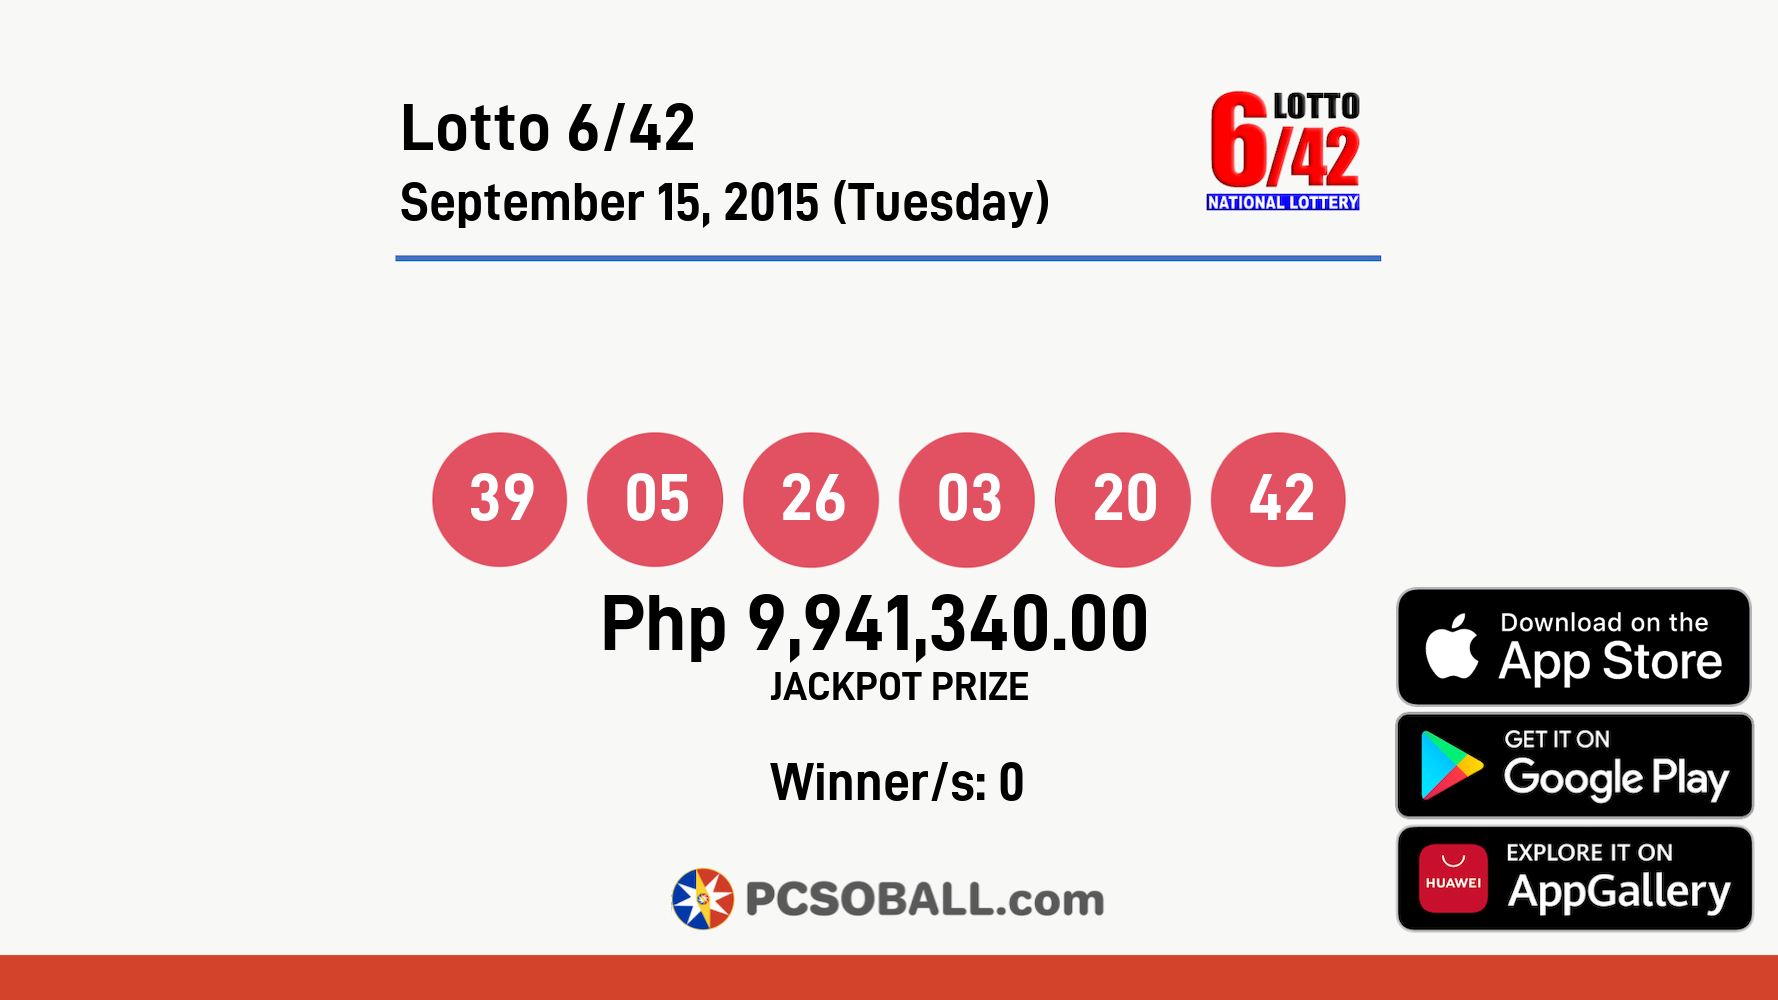 Lotto 6/42 September 15, 2015 (Tuesday) Result